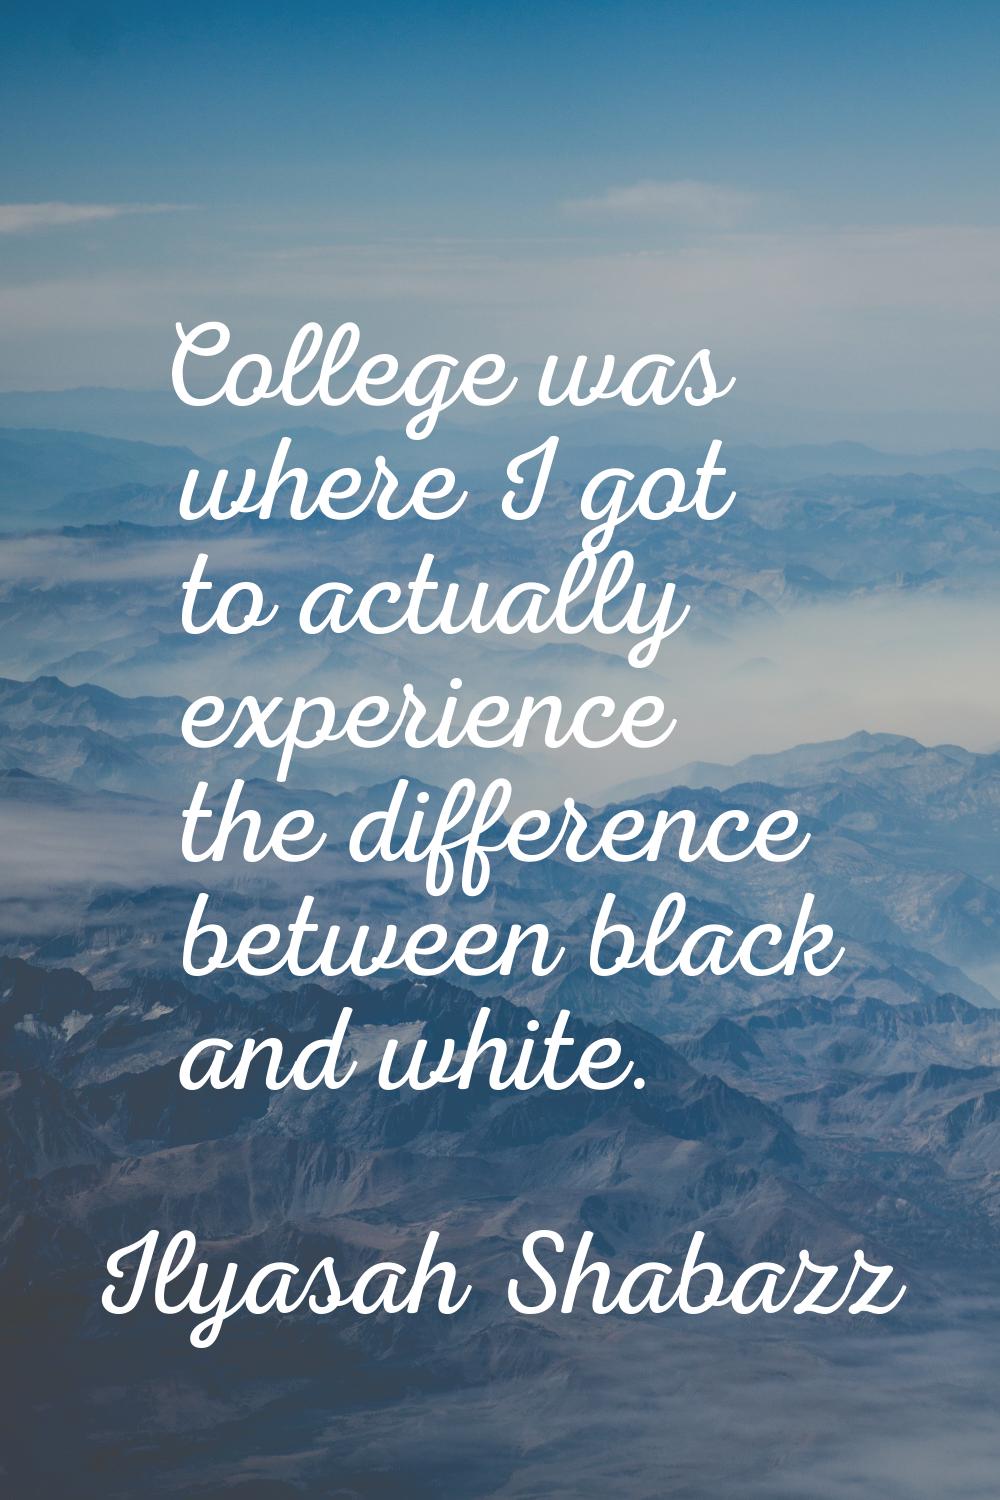 College was where I got to actually experience the difference between black and white.